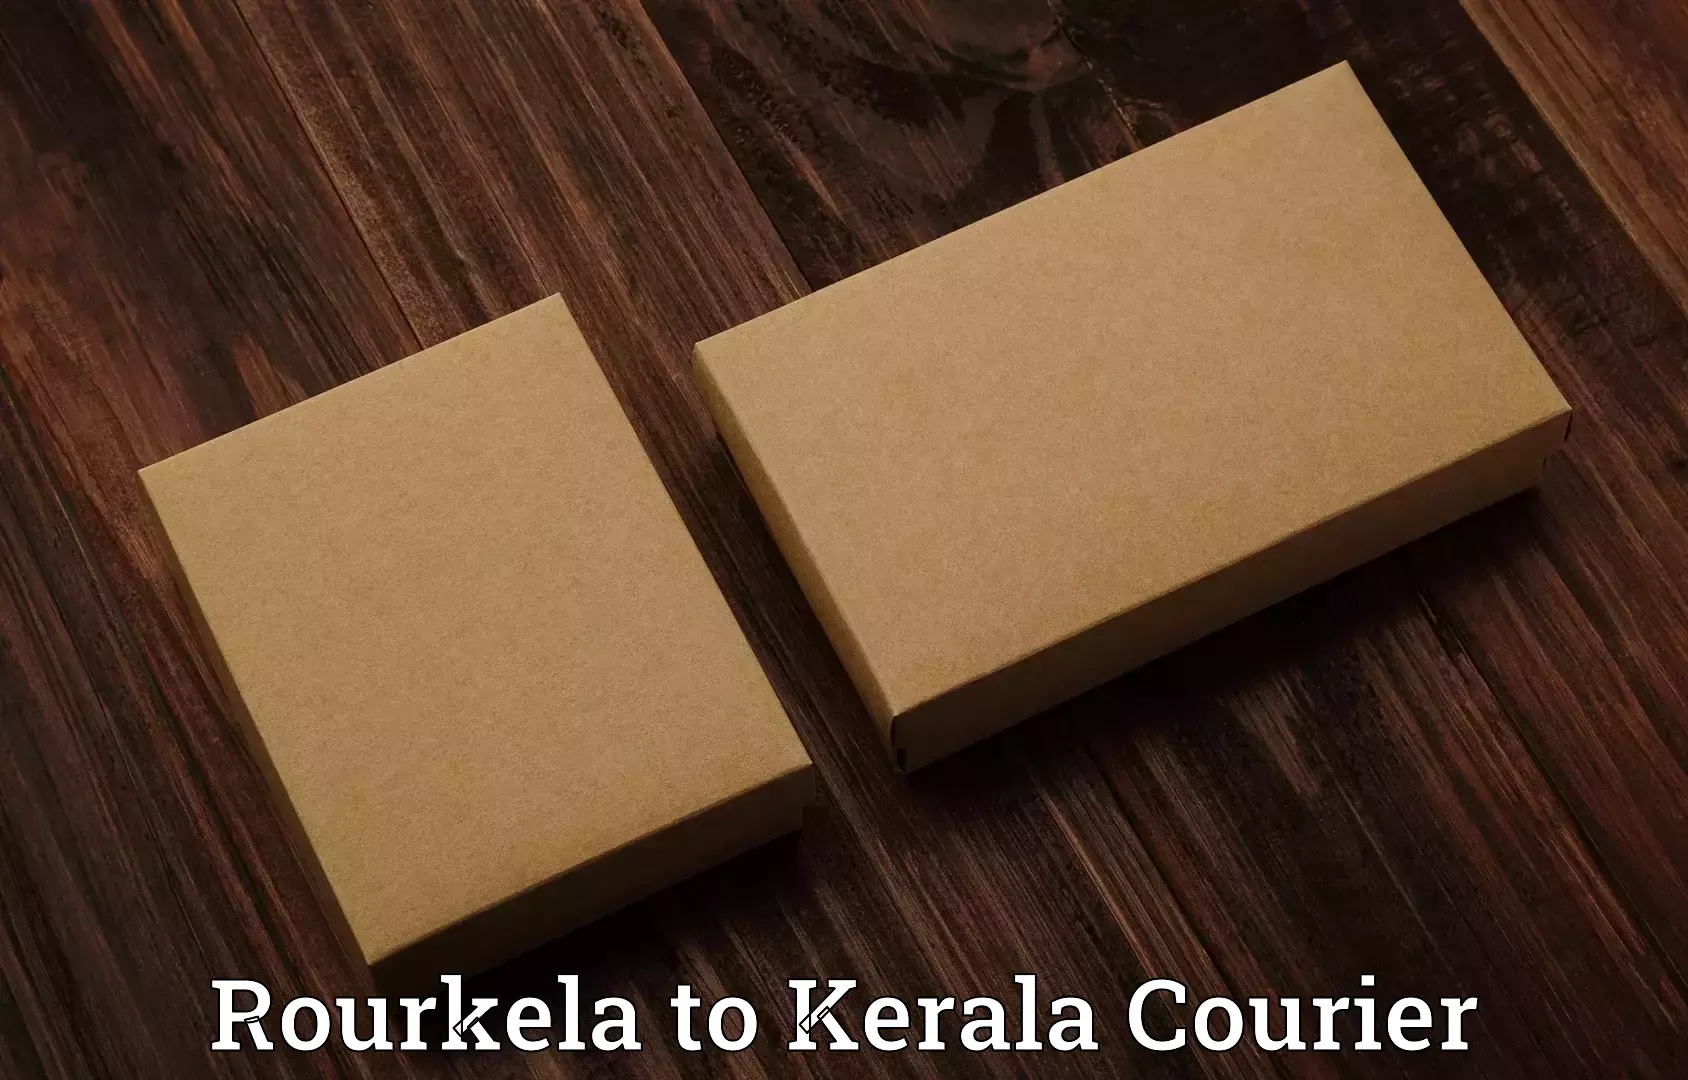 Baggage relocation service Rourkela to Cochin University of Science and Technology